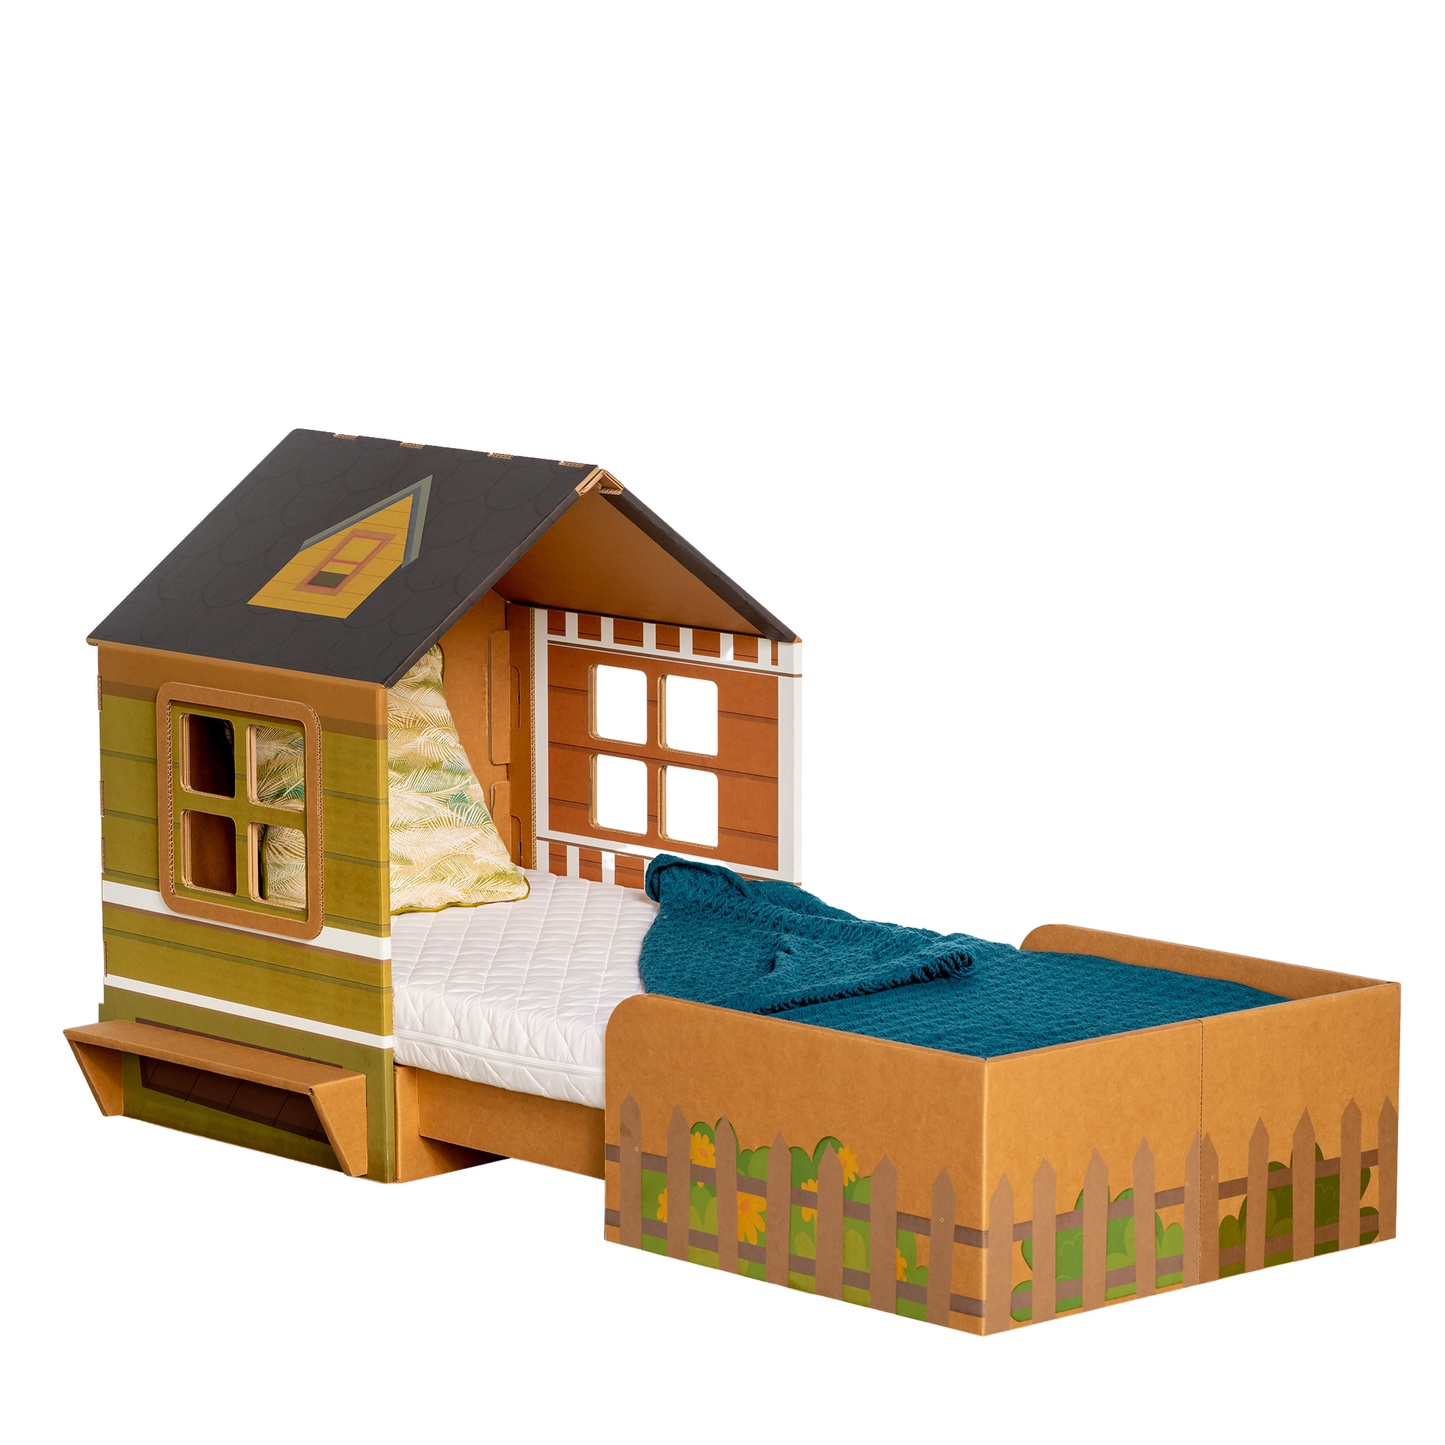 Cardboard Bed for children HOUSE - printed